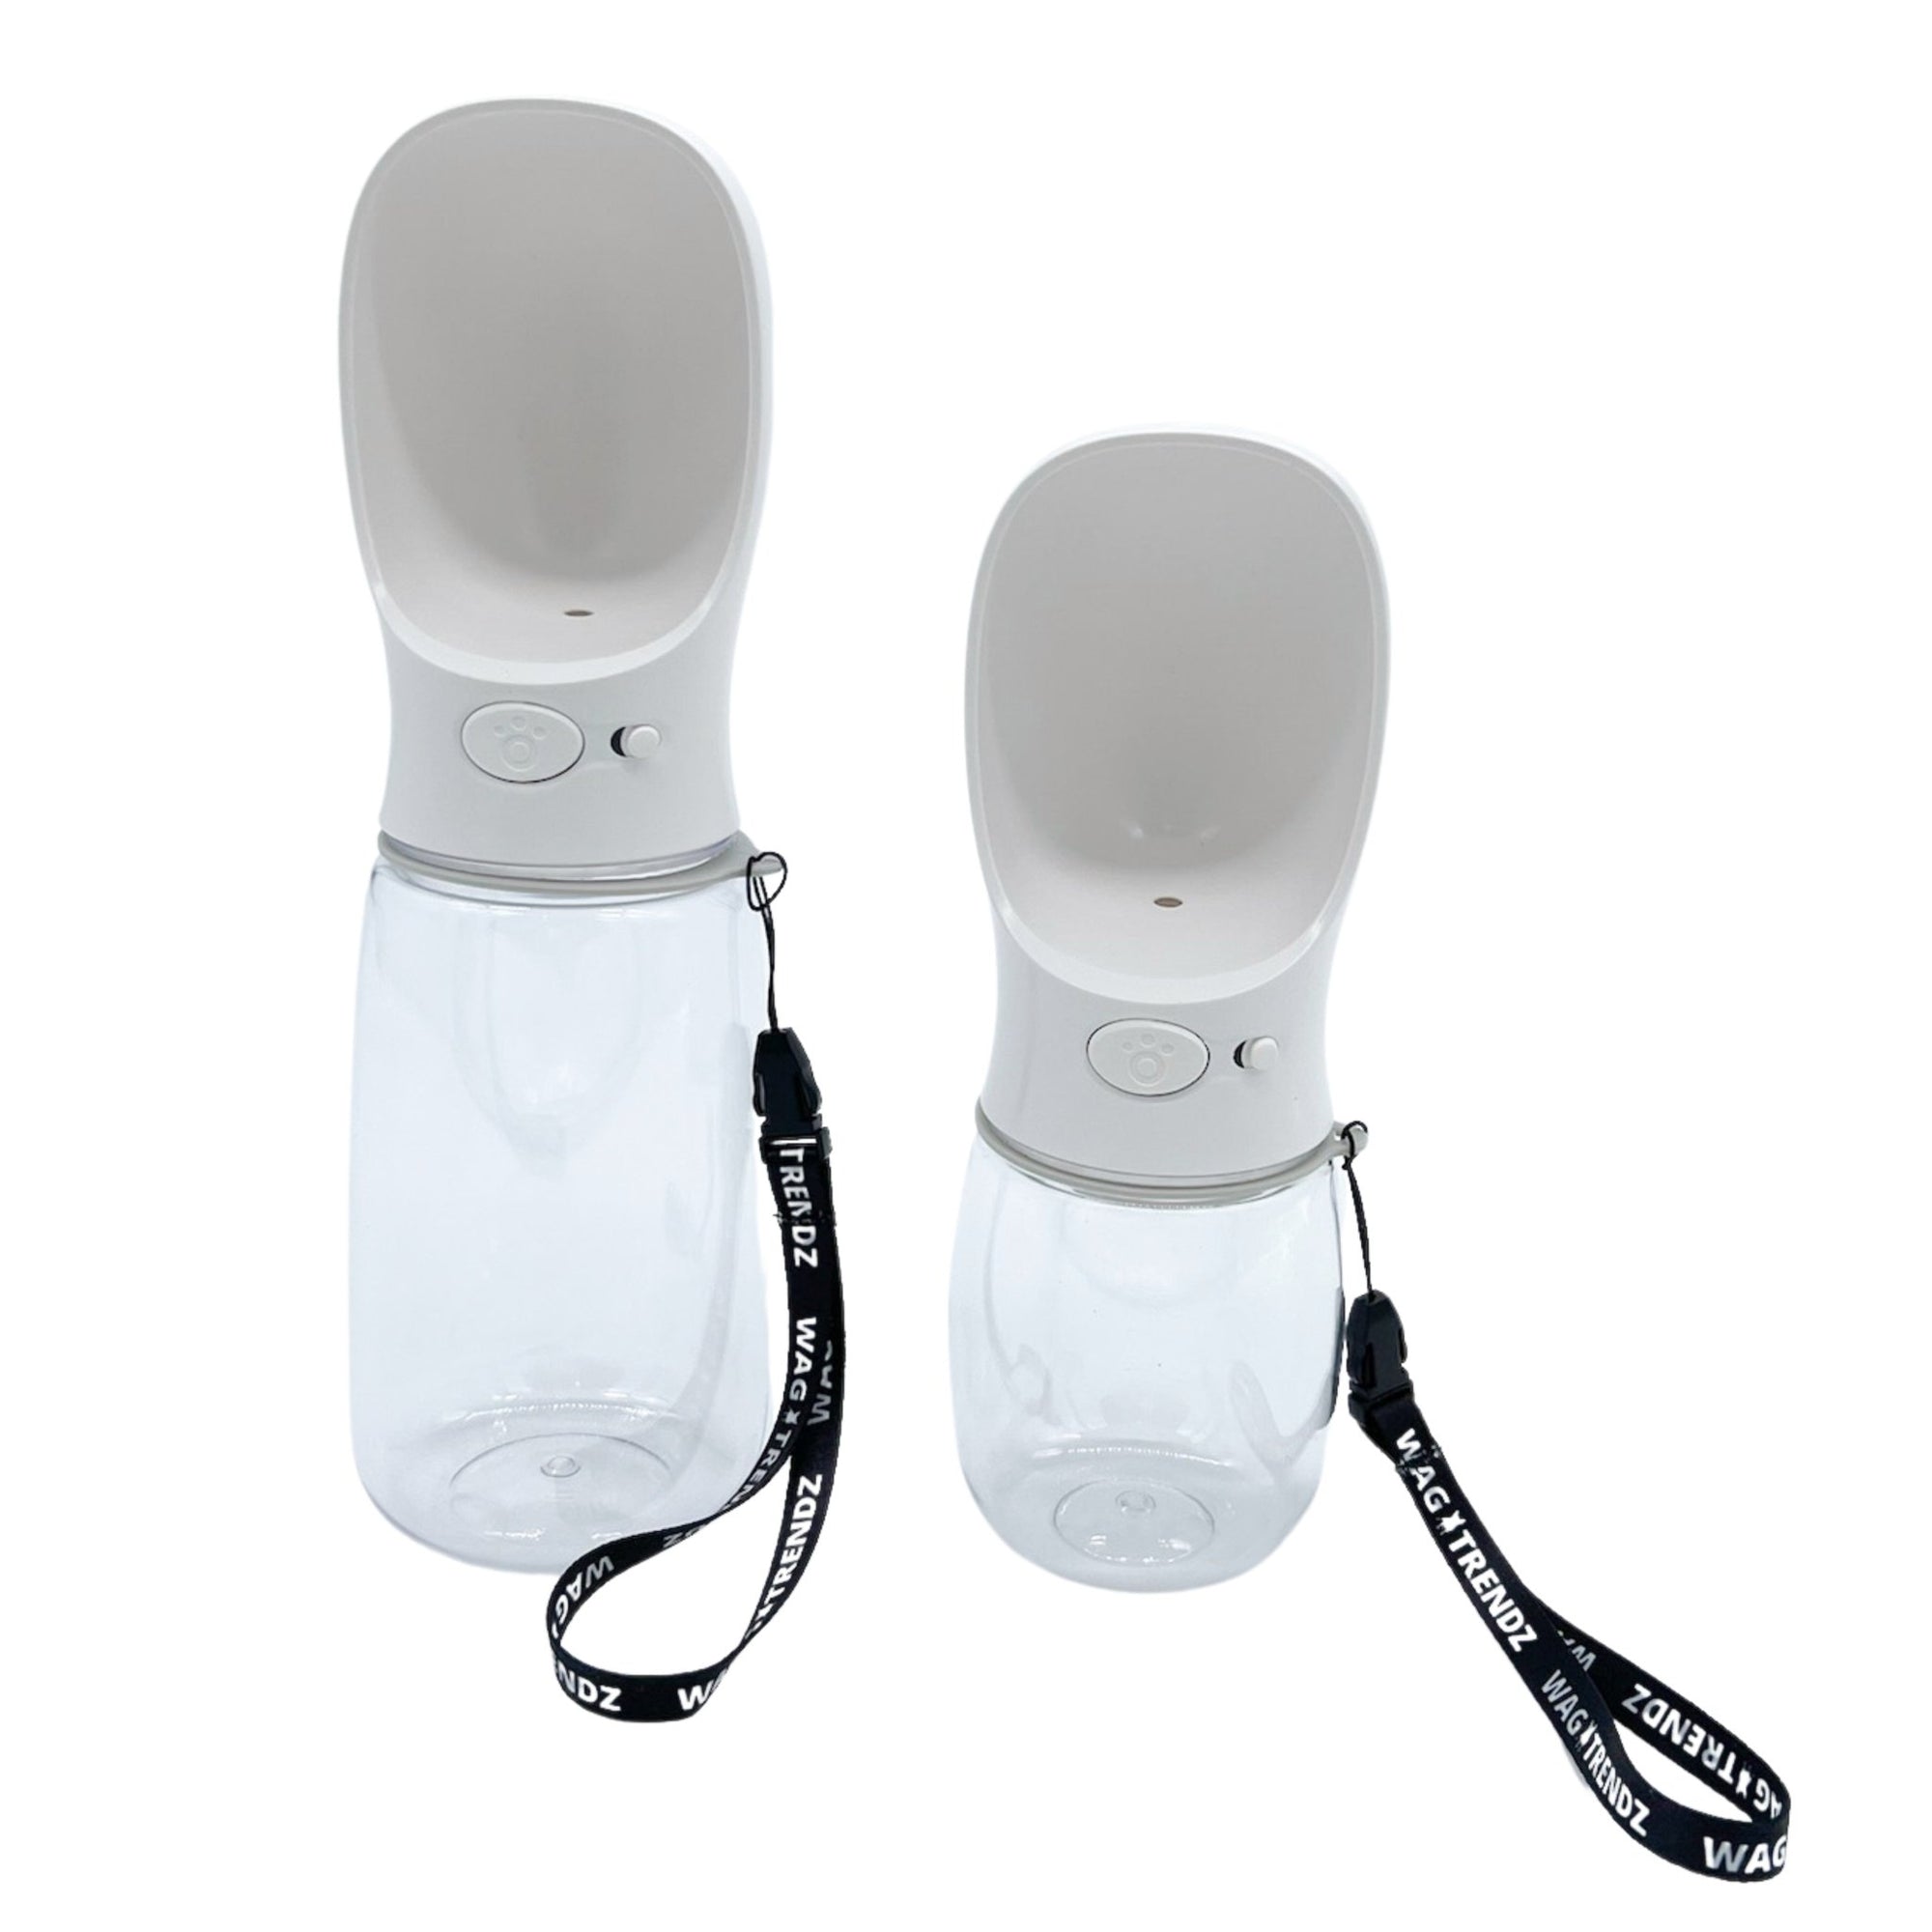 Dog Portable Water Bottle - white with black &amp; white logo strap - large and small against solid white background - Wag Trendz